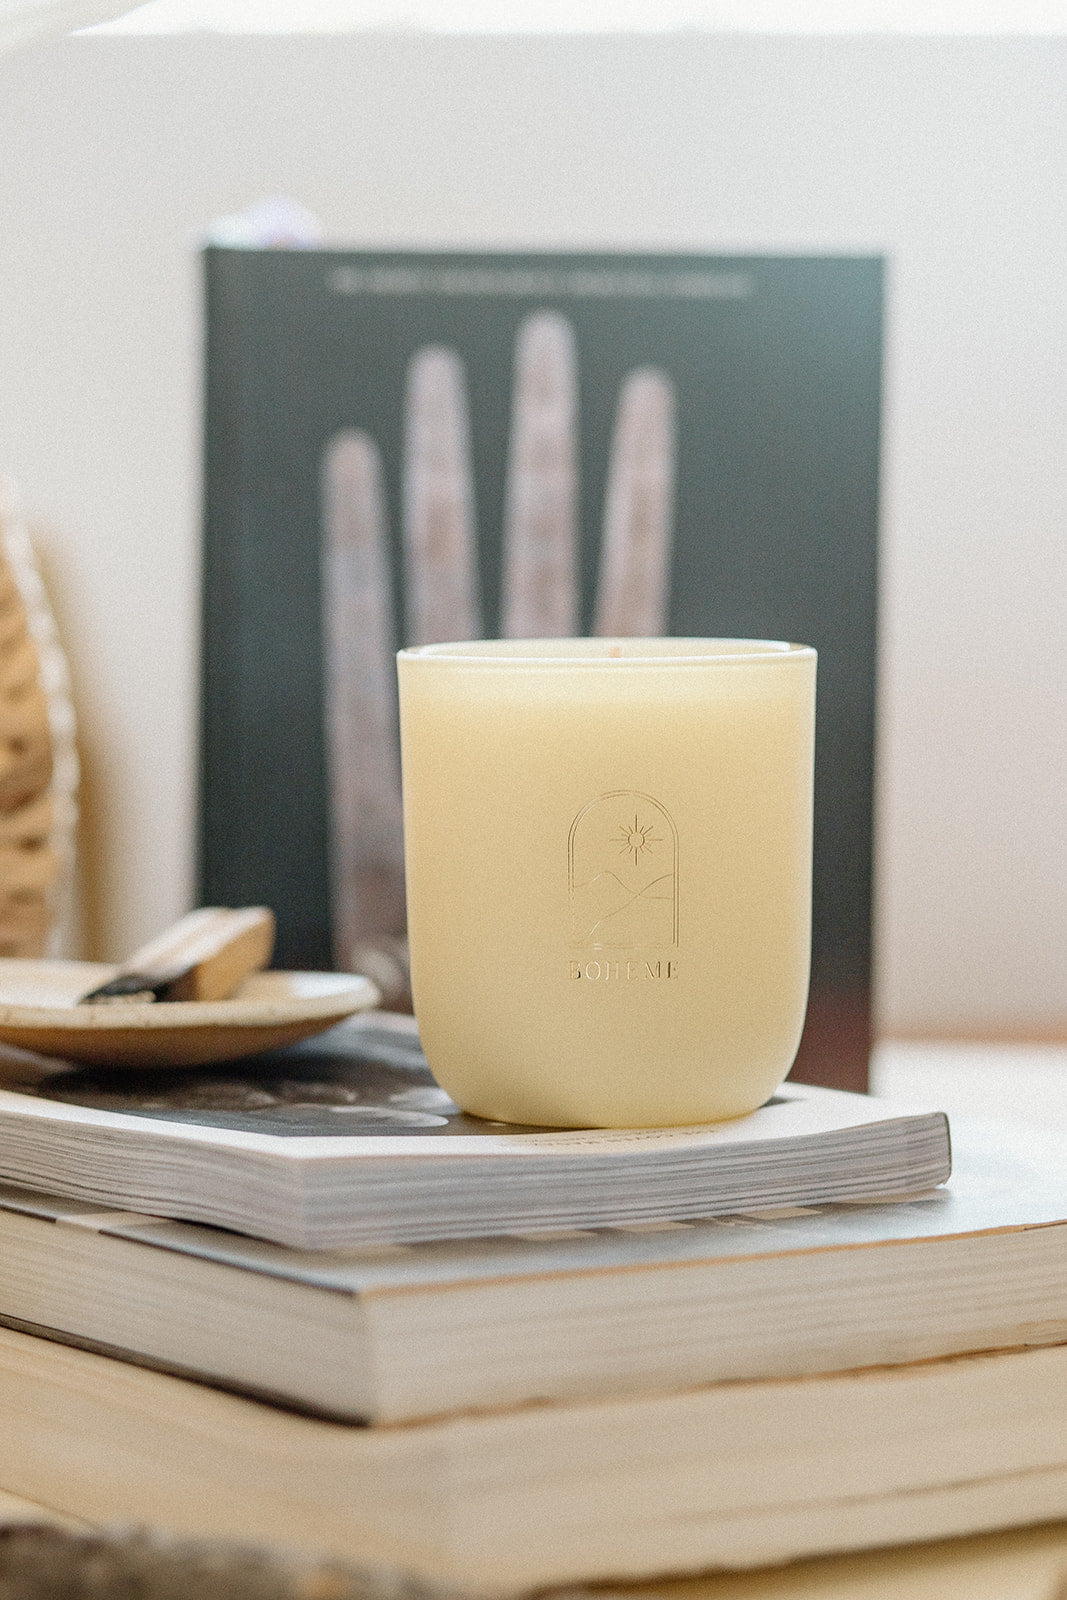 Clean, All Natural, Sustainable Soy, Vegan, Phthalate Free Joshua Tree Candle. The top, middle and bottom feature three different scents so this is like three candles in one! Bergamot and agave to tuberose and cactus blossom to amber and patchouli.